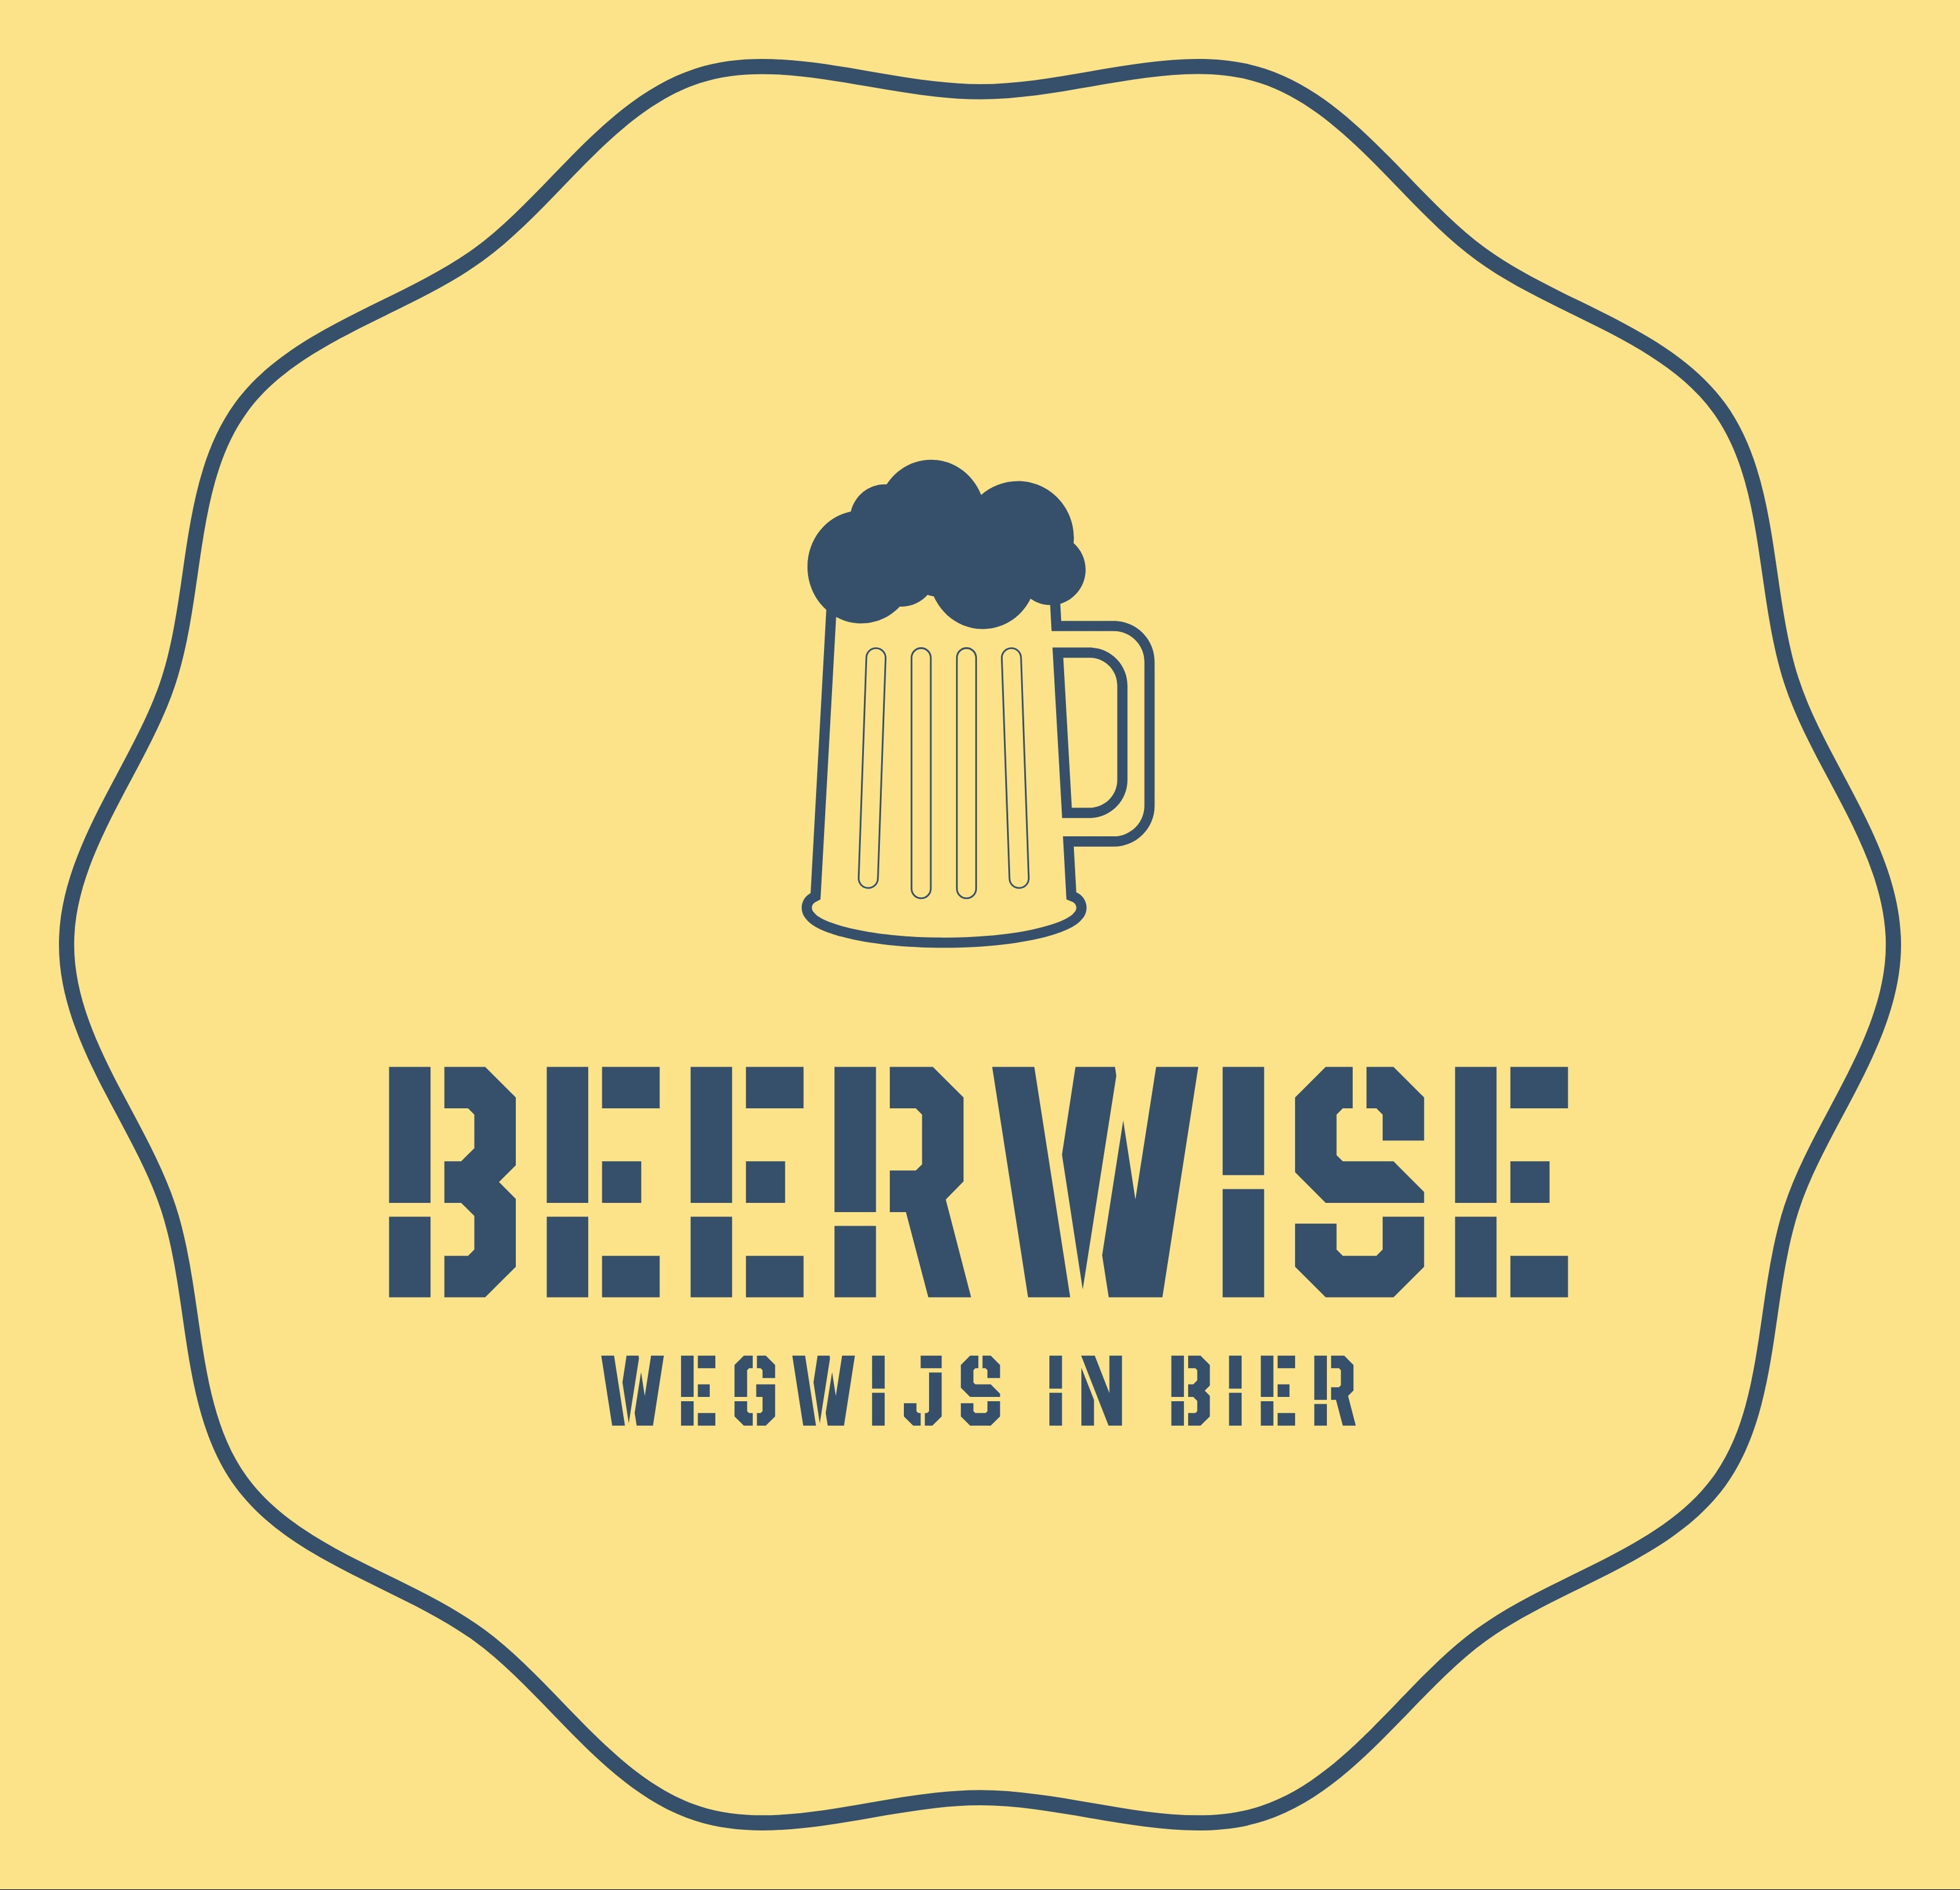 Beerwise